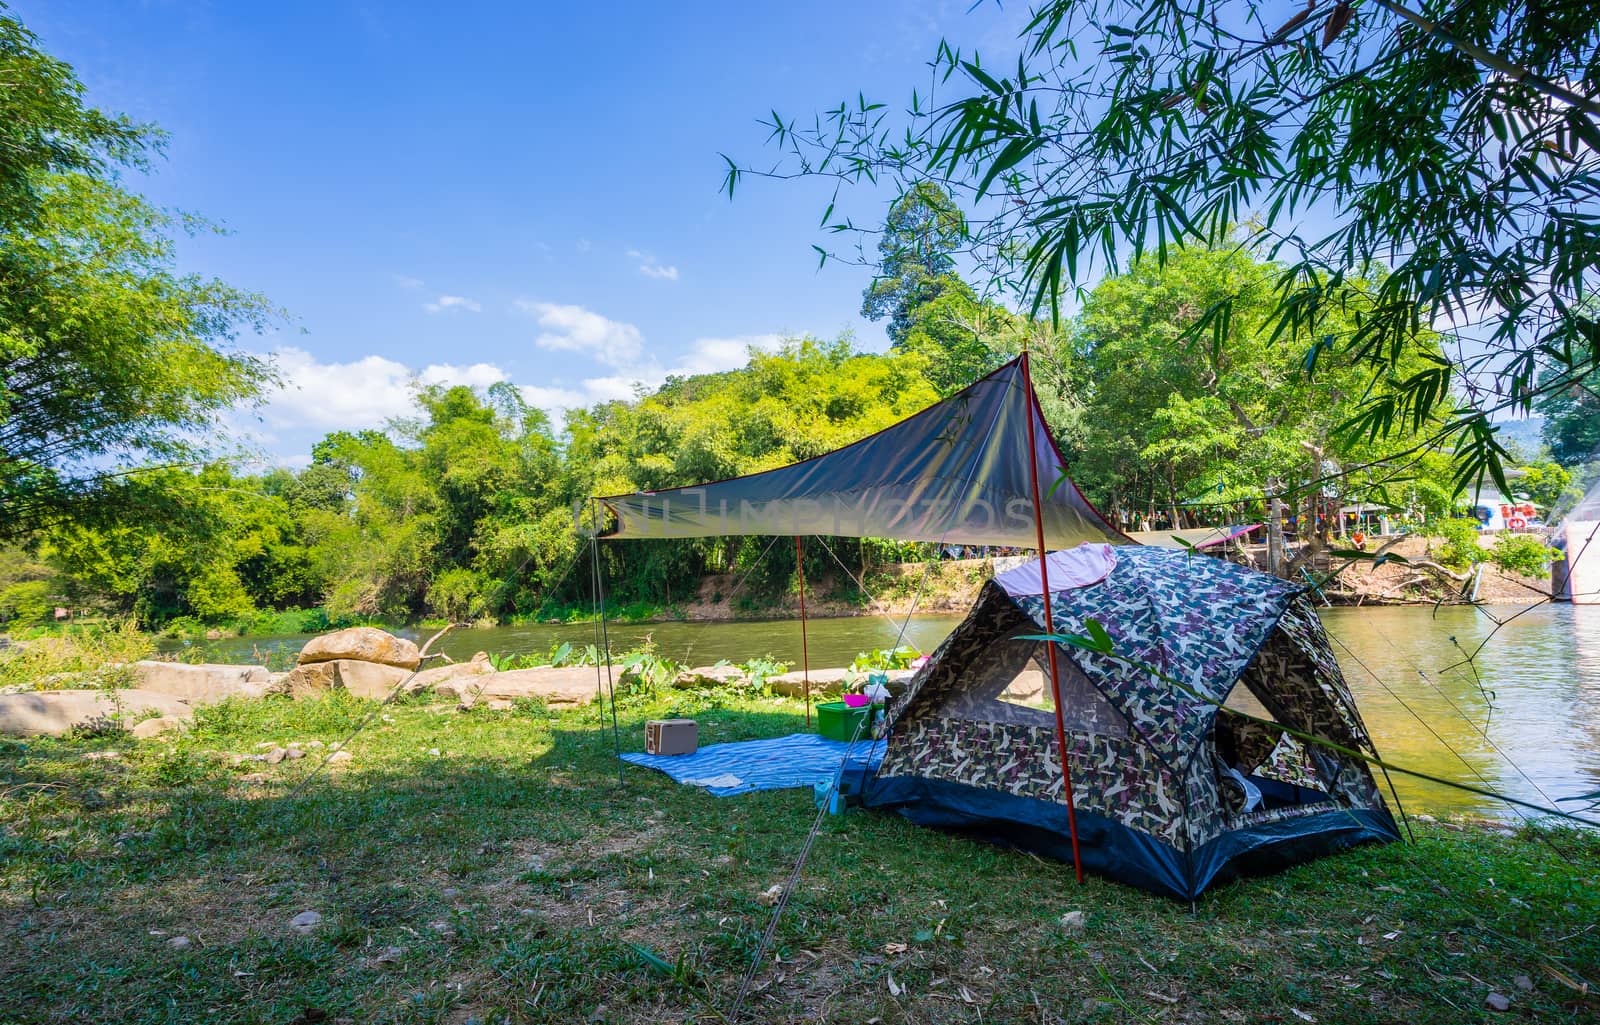 Camping and tent in nature park near the river